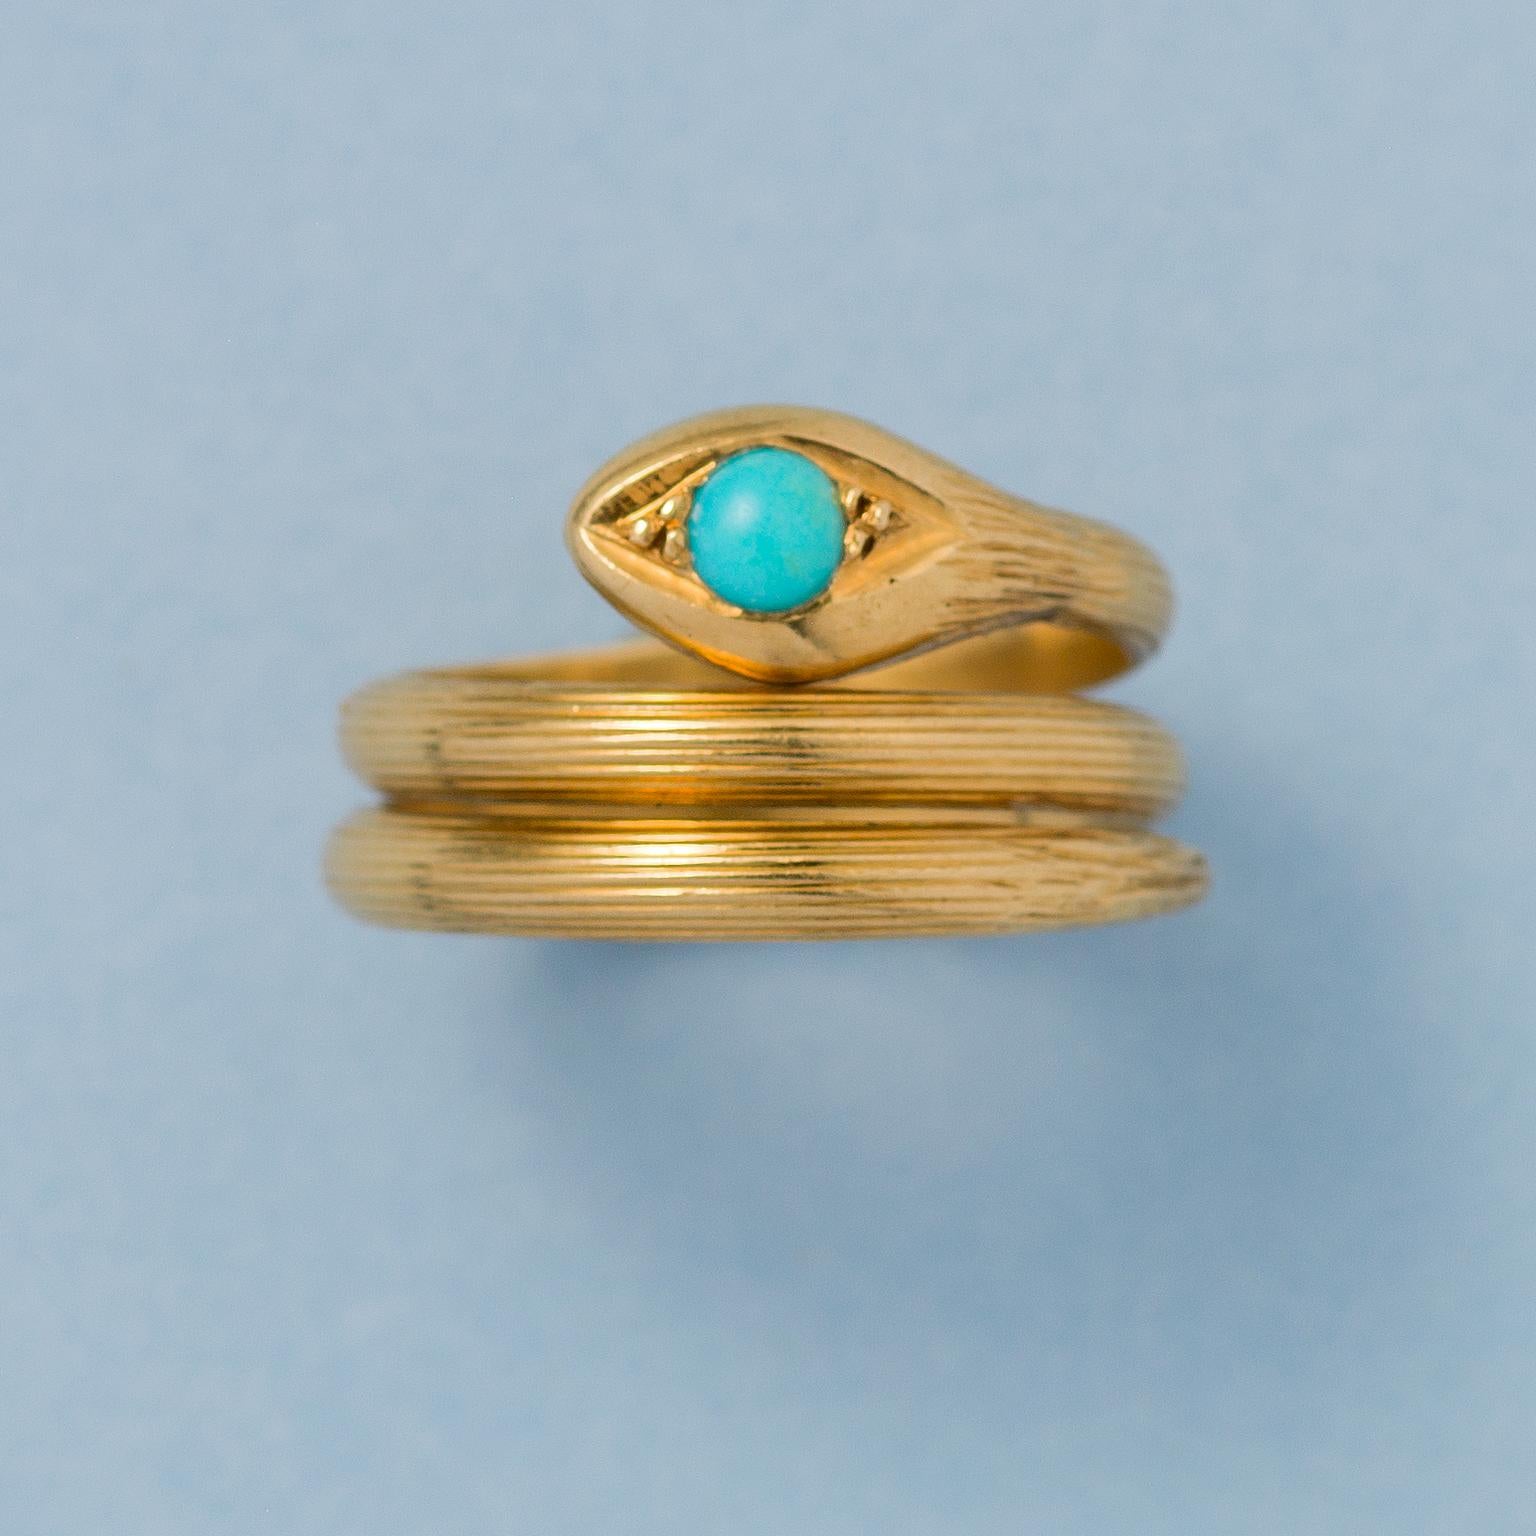 A little French snake ring 18k gold engraved vertically with stripes and a cabochon cut turquoise eye, France, circa 1910.

weight: 5.97 grams
ring size: 17 mm / 6.5 US
width: 1.2 cm